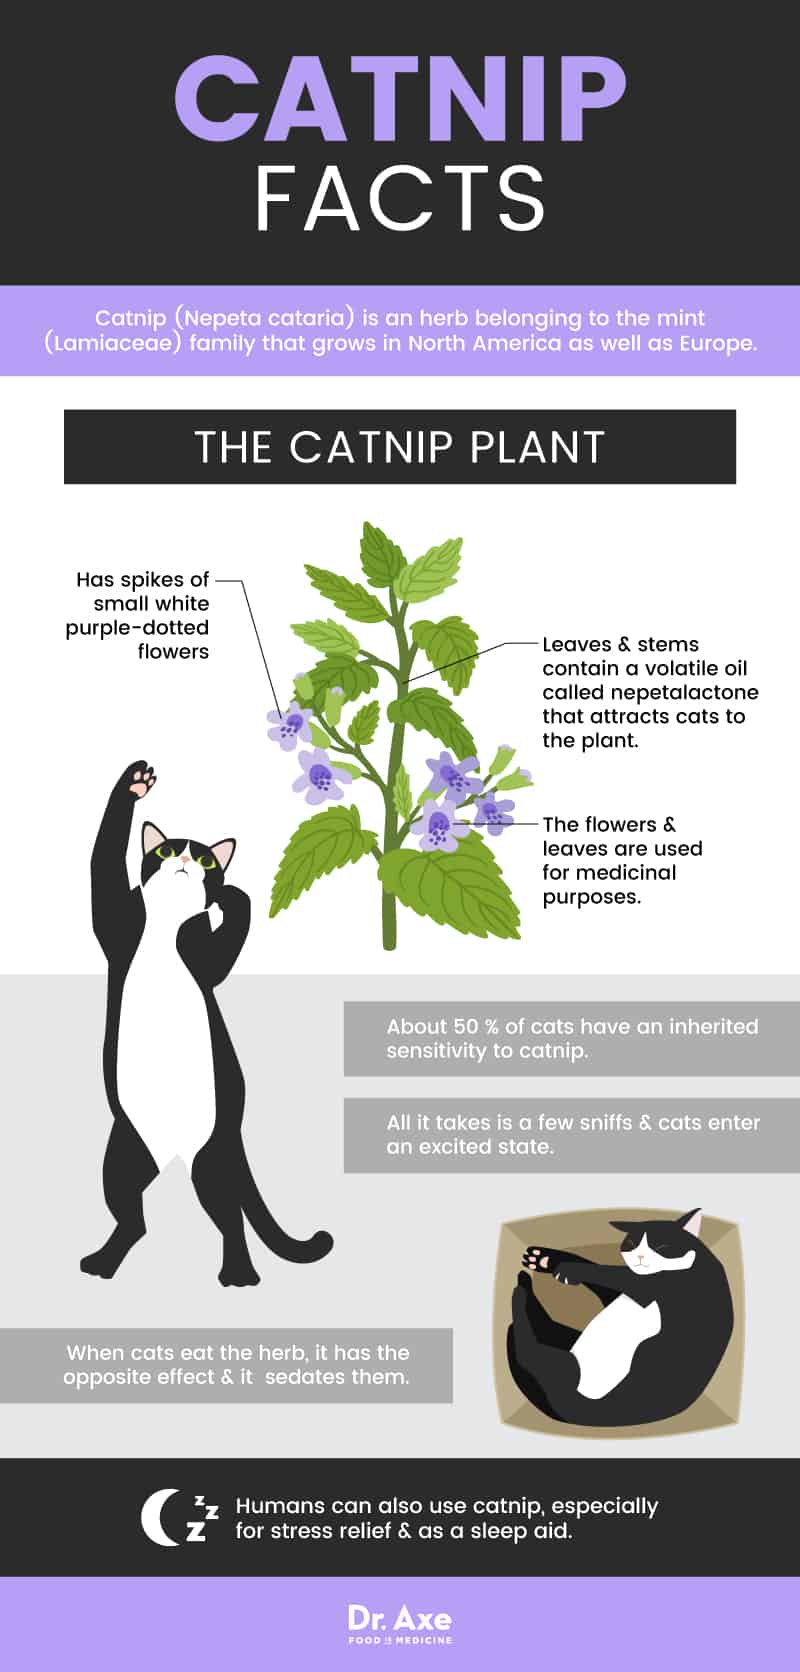 Catnip Facts - Dr Axe